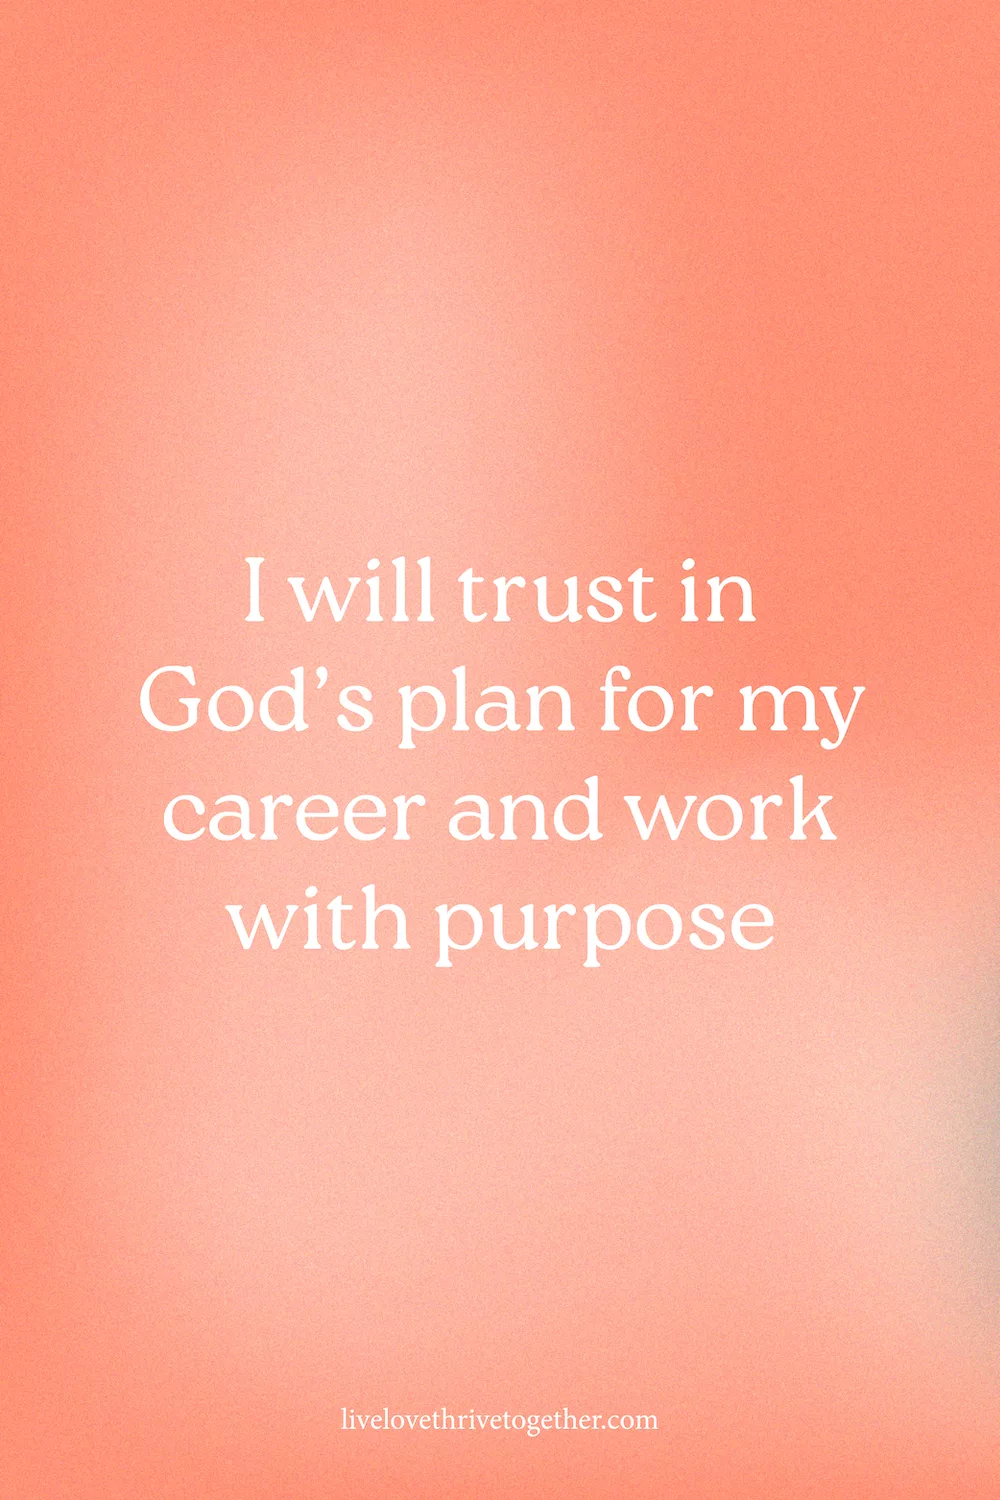 I will trust in God's plan for my career and work with purpose | Monday Affirmations